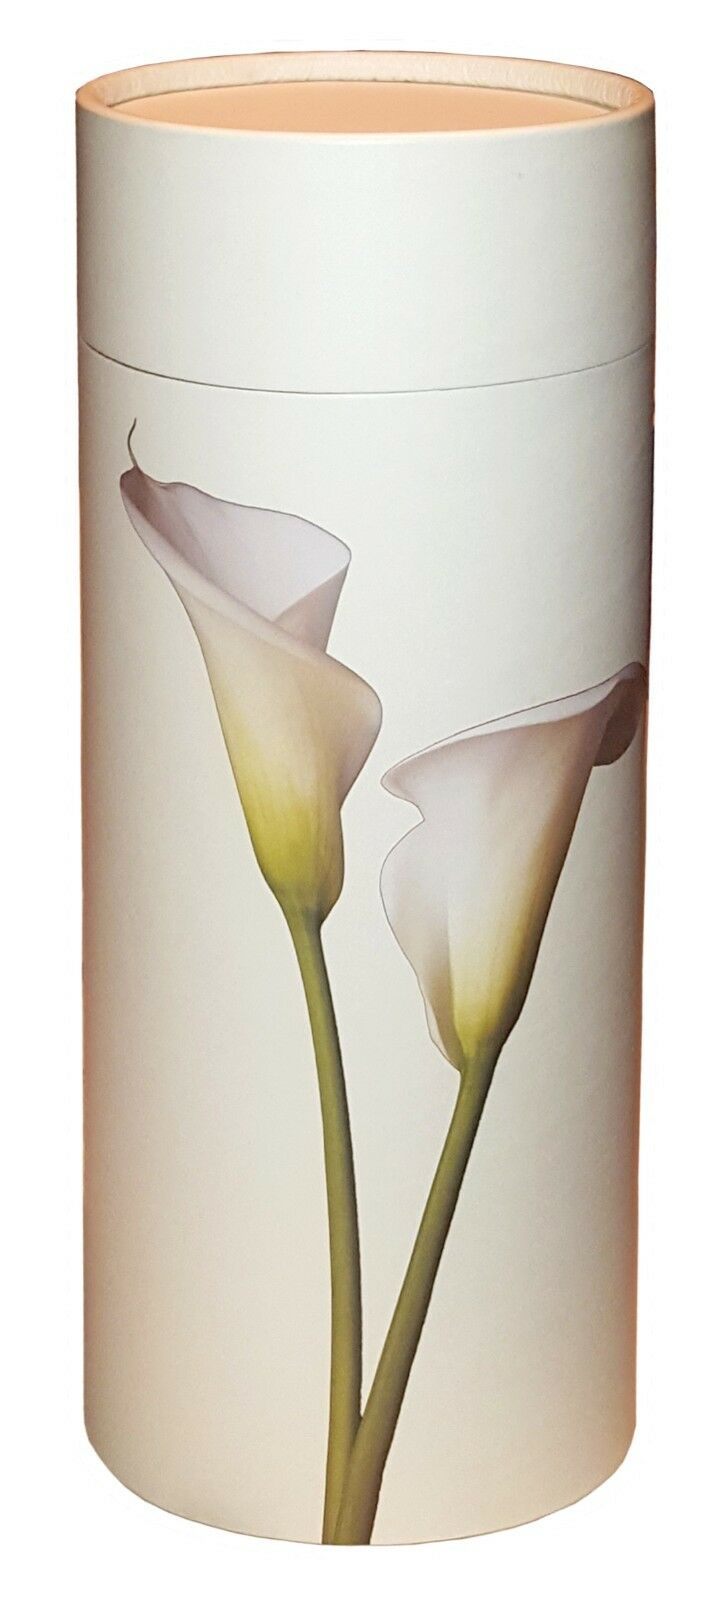 Biodegradable Ash Scattering Tube Funeral Cremation Urn - 200 cubic inches